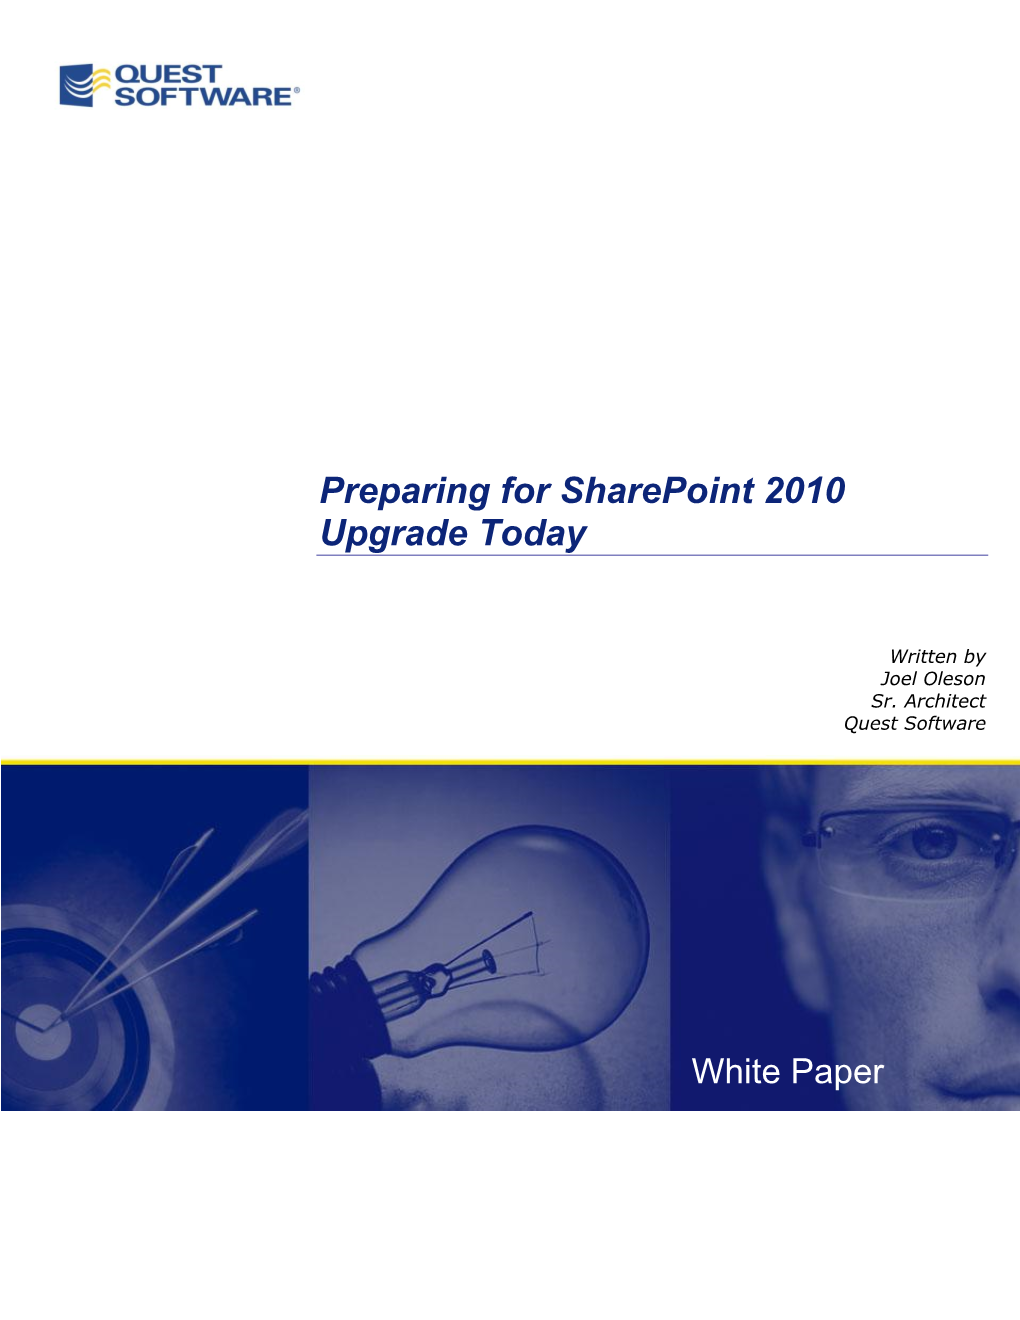 Preparing for Sharepoint 2010 Upgrade Today